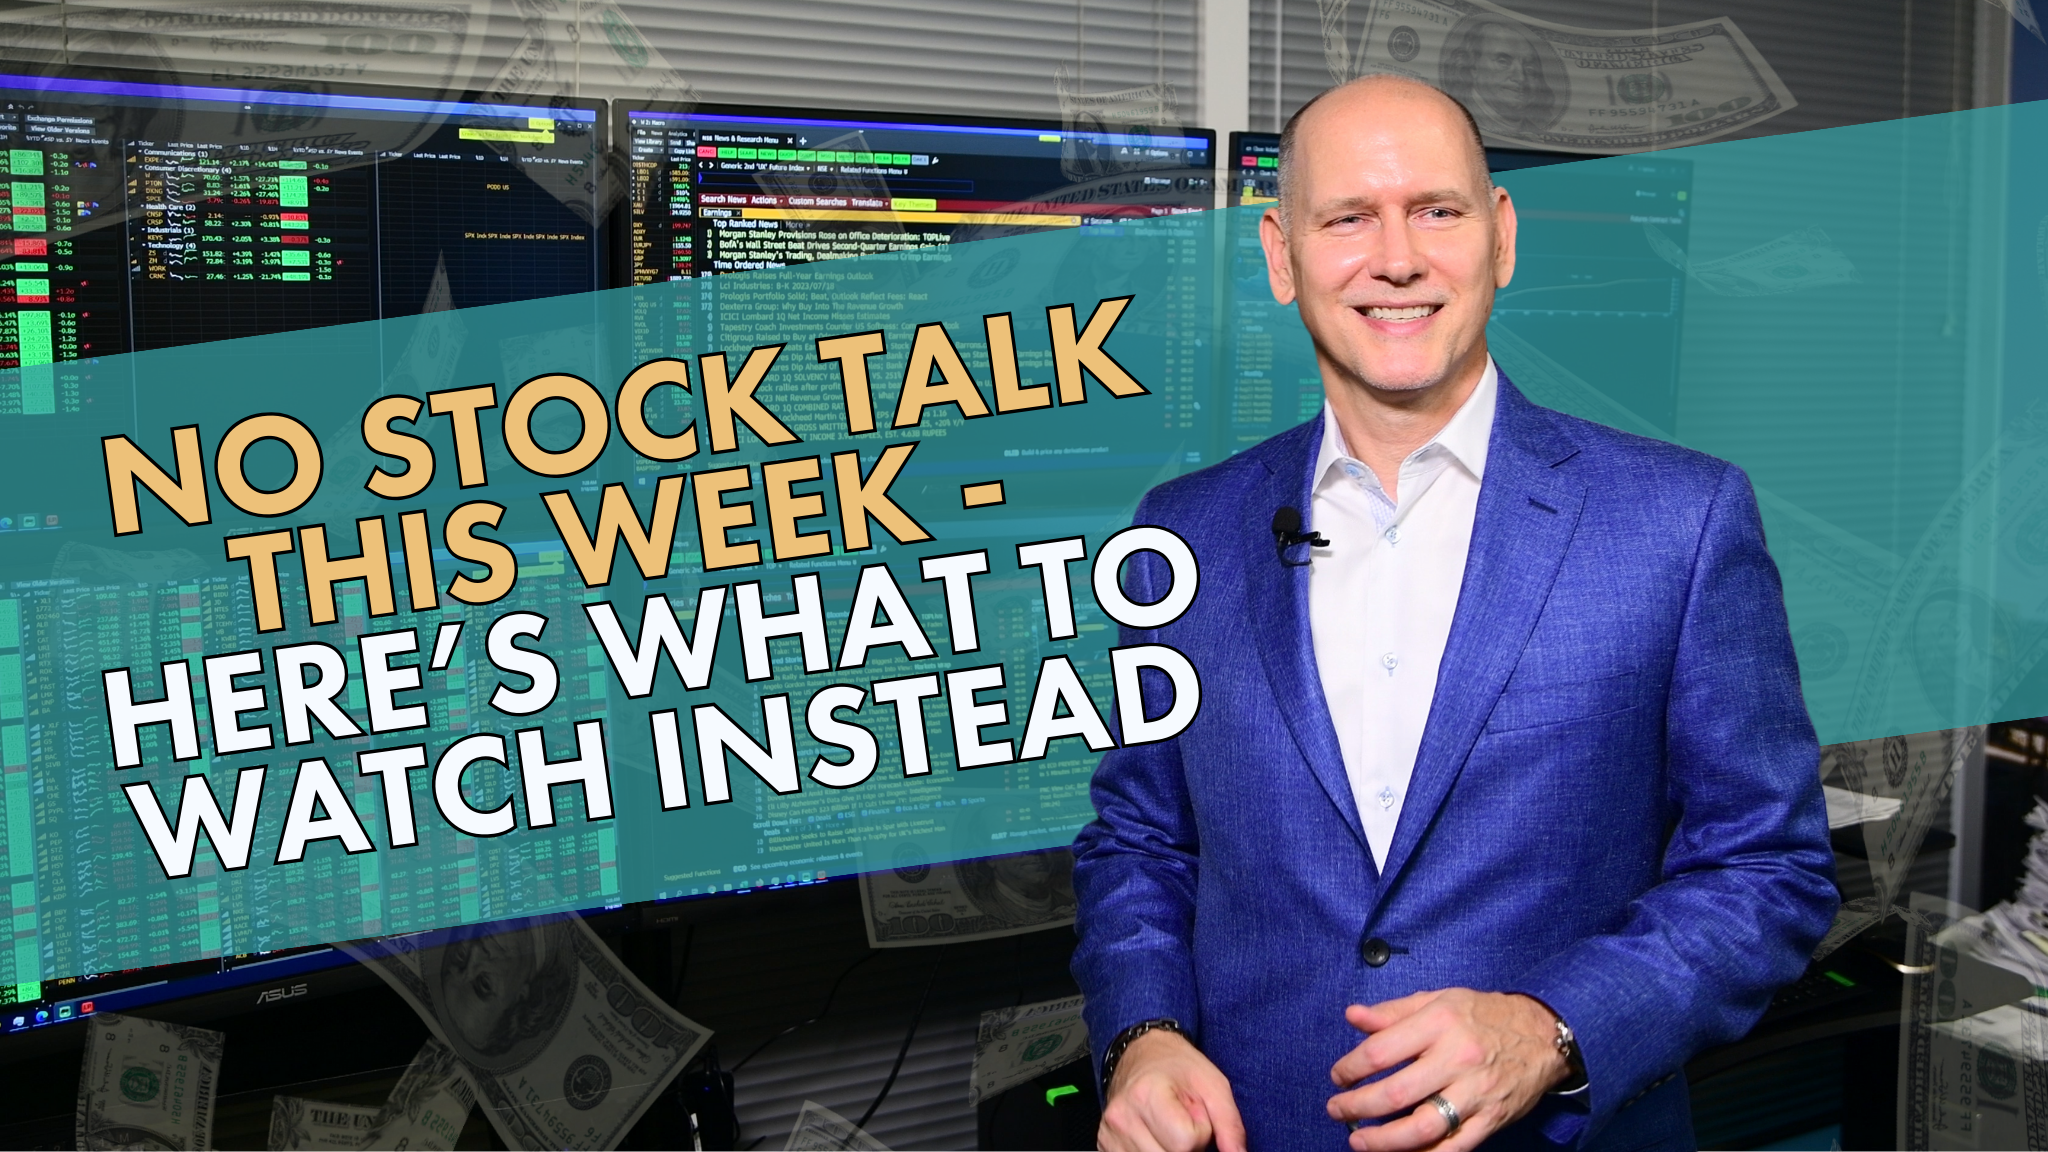 No Stock Talk this week, here's what to watch instead